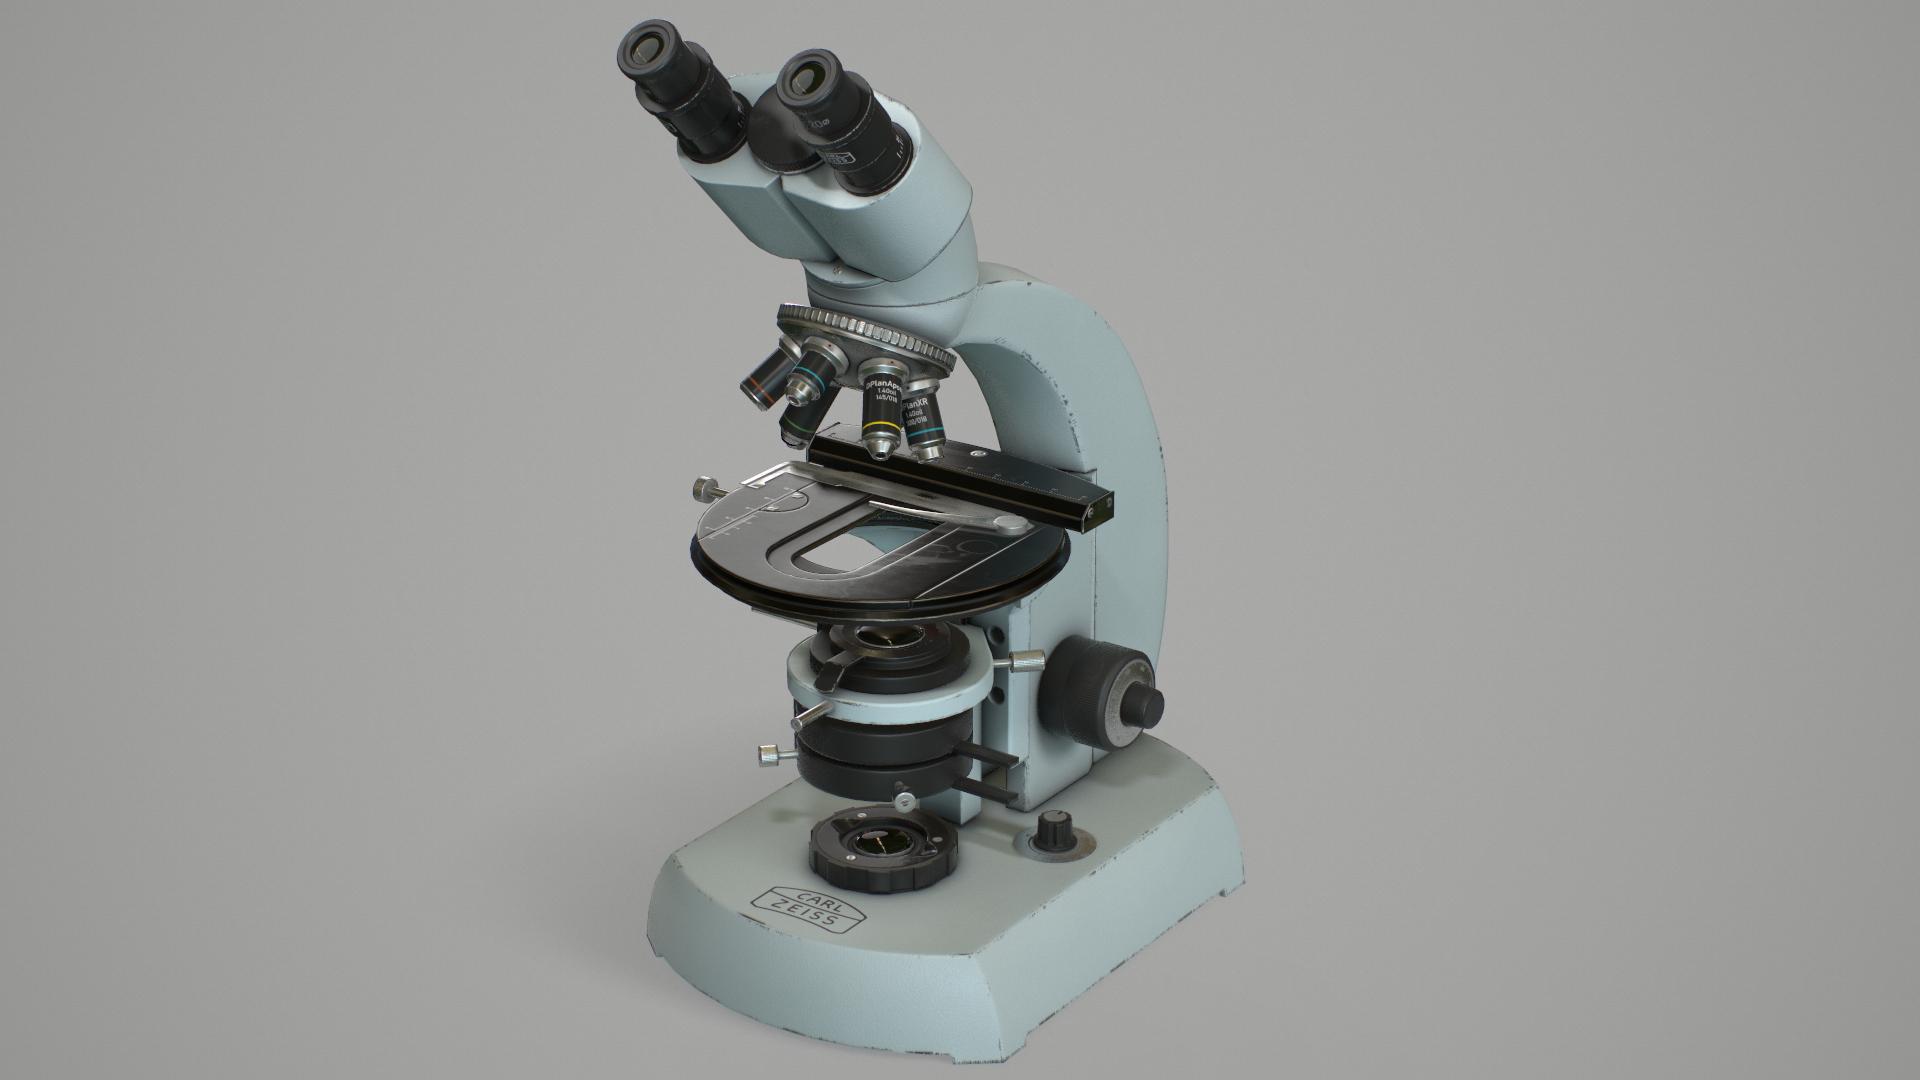 Render of a zeiss microscope